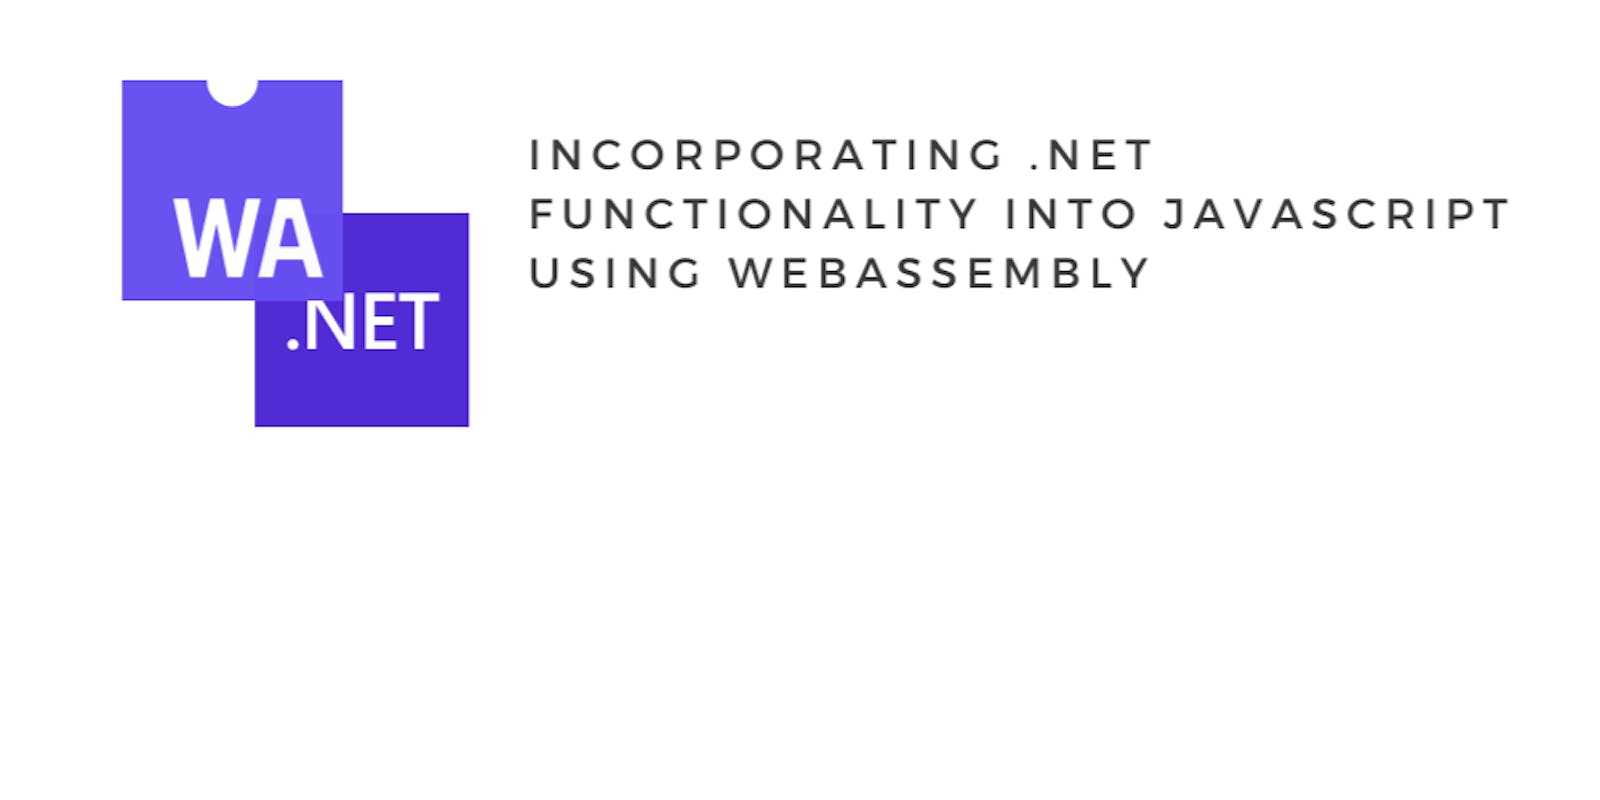 Incorporating .NET Functionality into JavaScript using WebAssembly